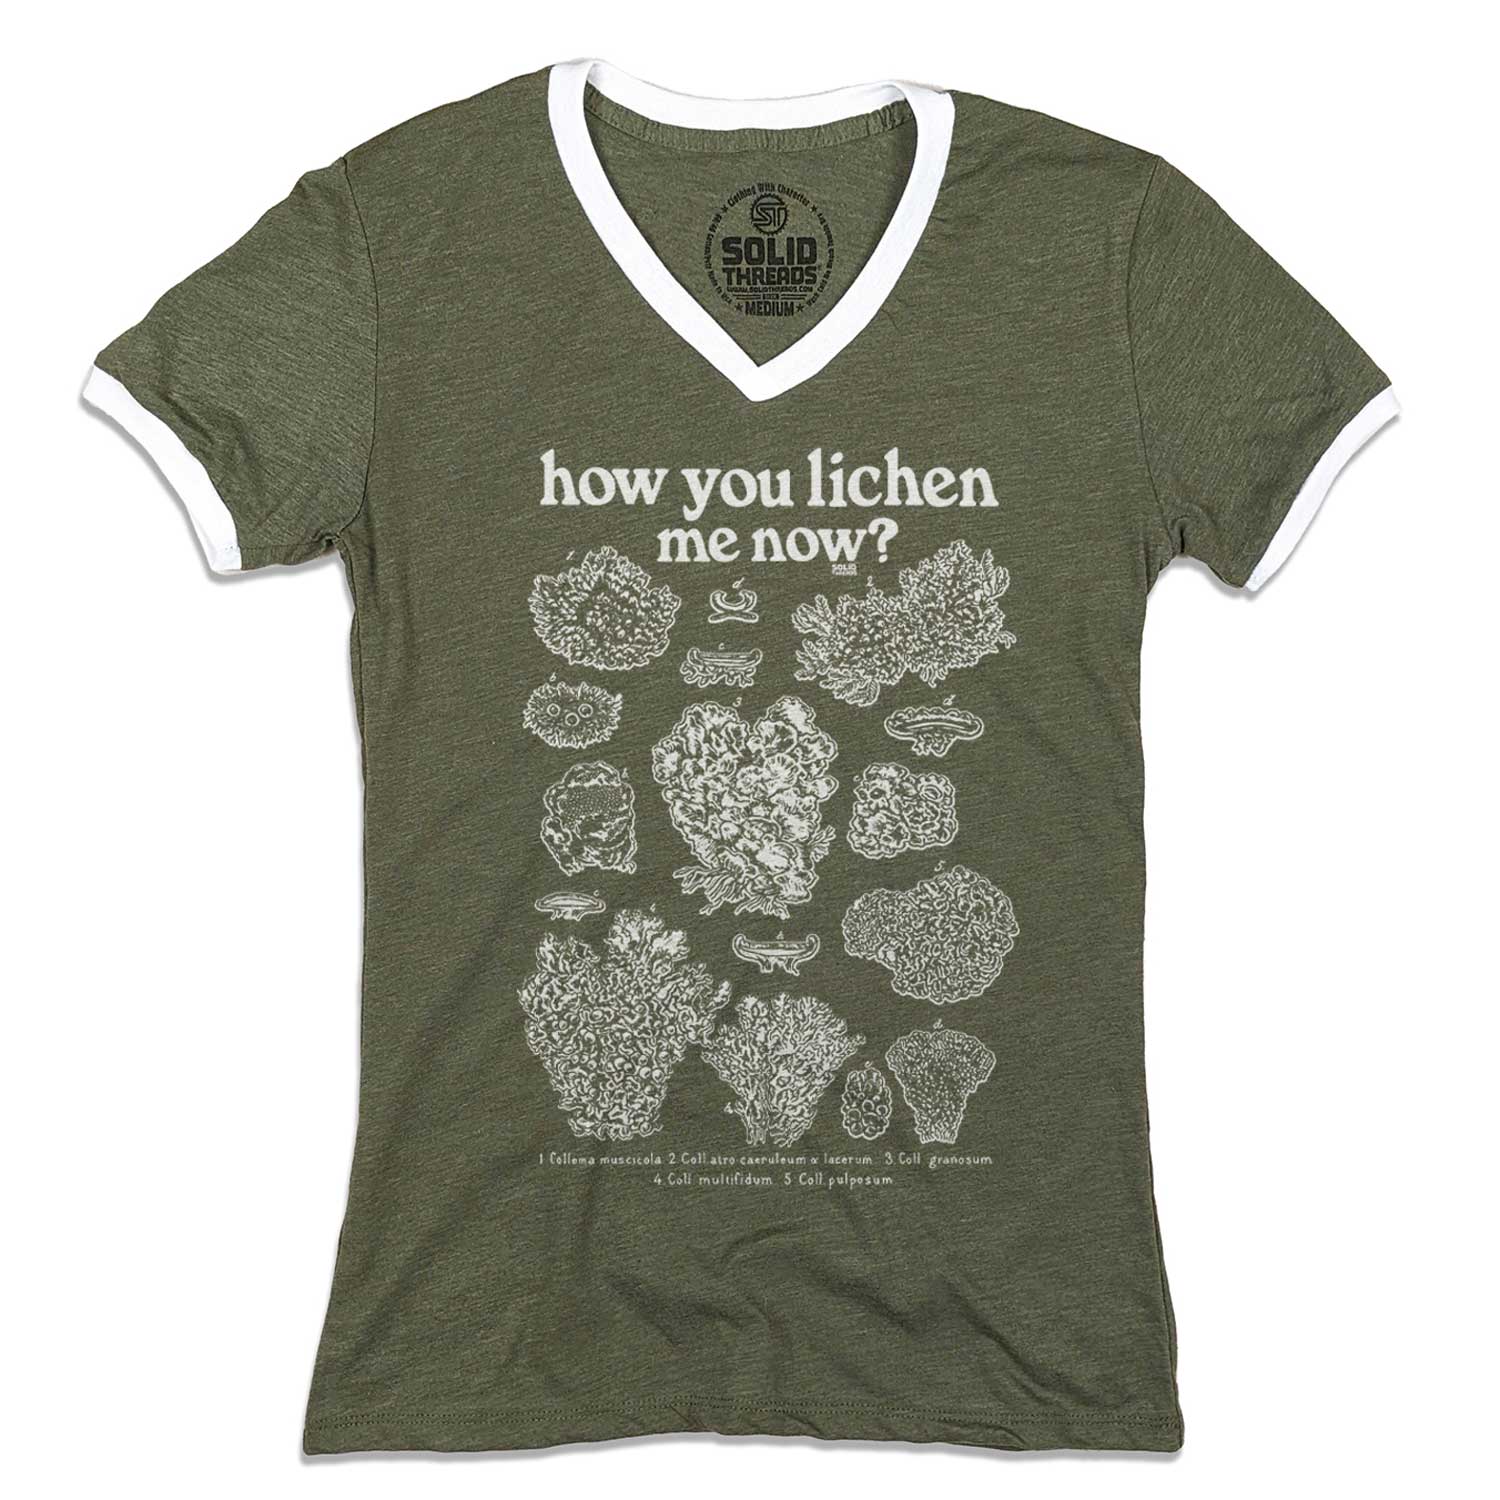 Women's How You Lichen Me Now Vintage Graphic V-Neck Tee | Funny Moss T-shirt | Solid Threads